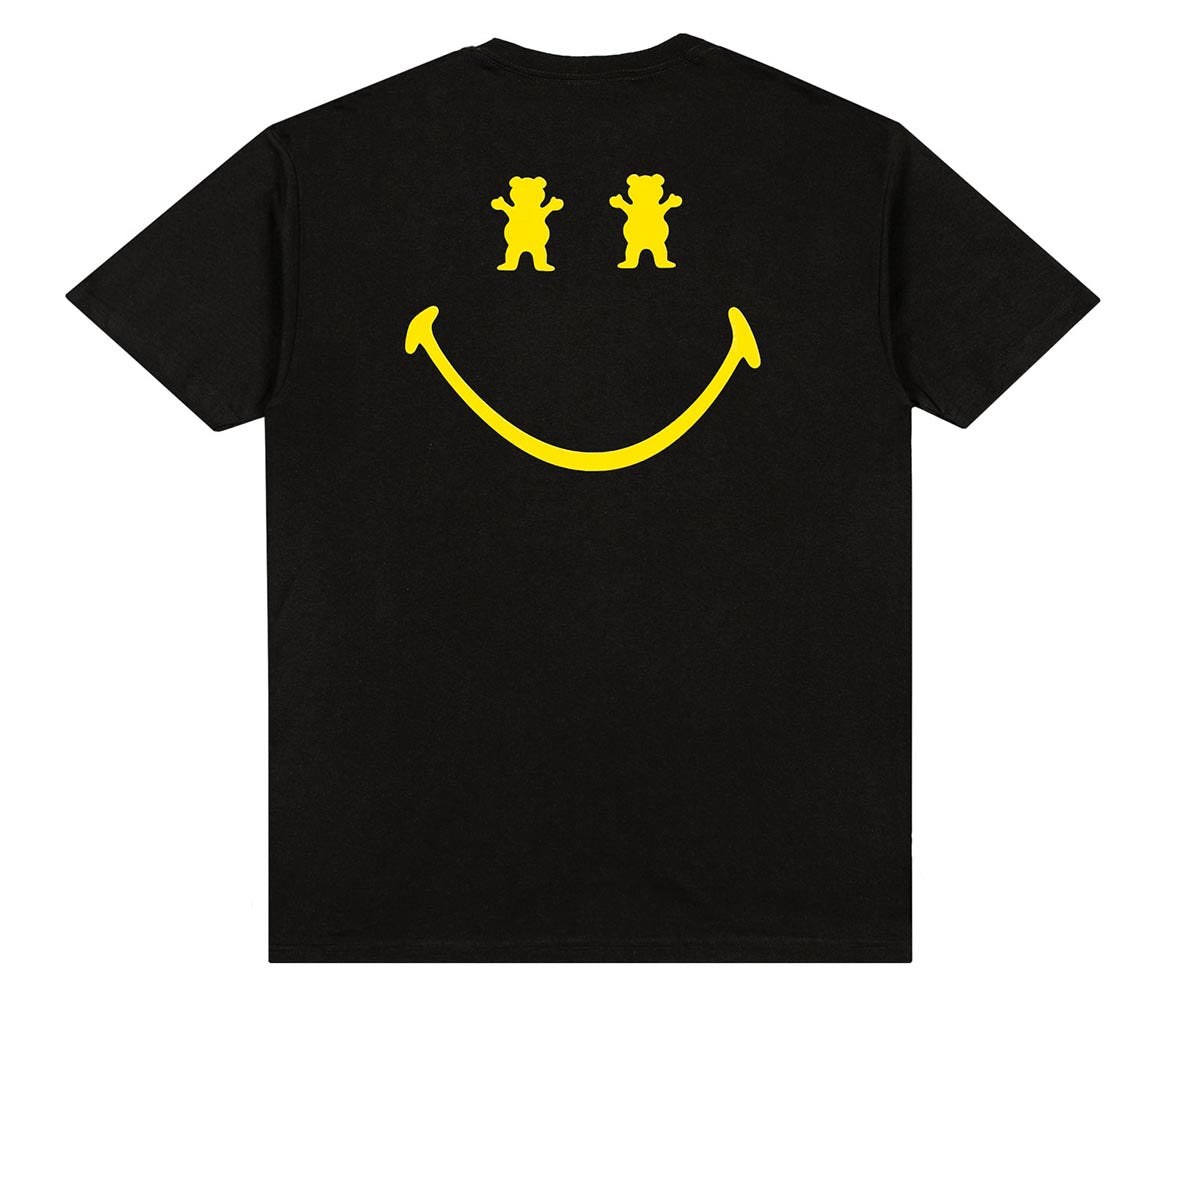 Grizzly x Smiley World Big Smile T-Shirt - Black image 2